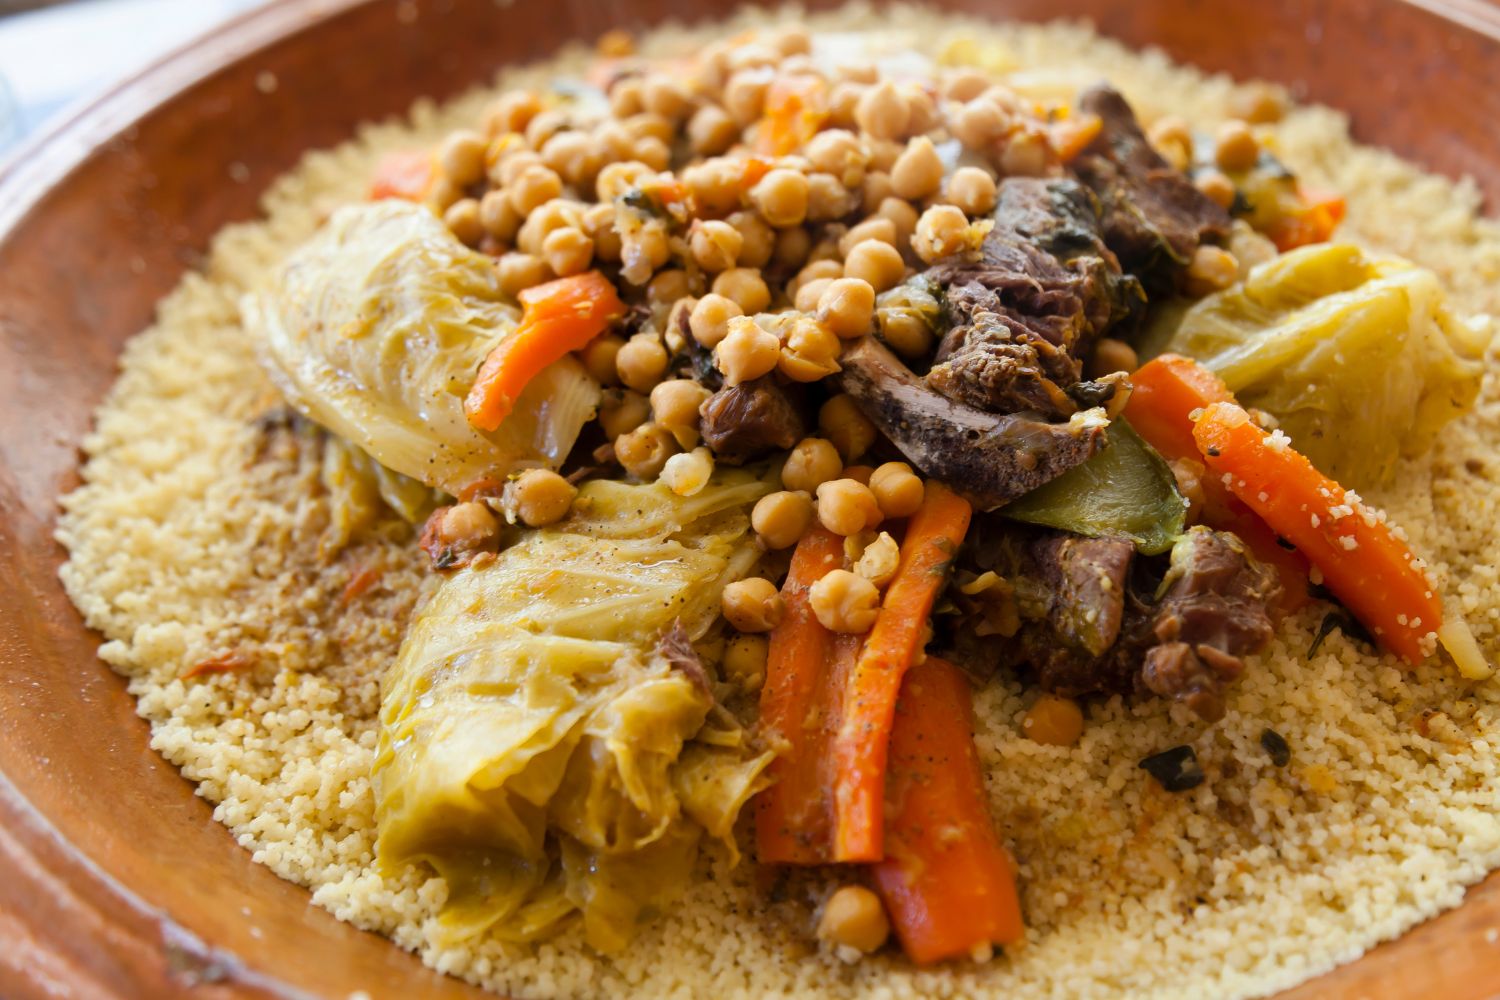 Couscous dish with vegetables and meat served in a brown plate